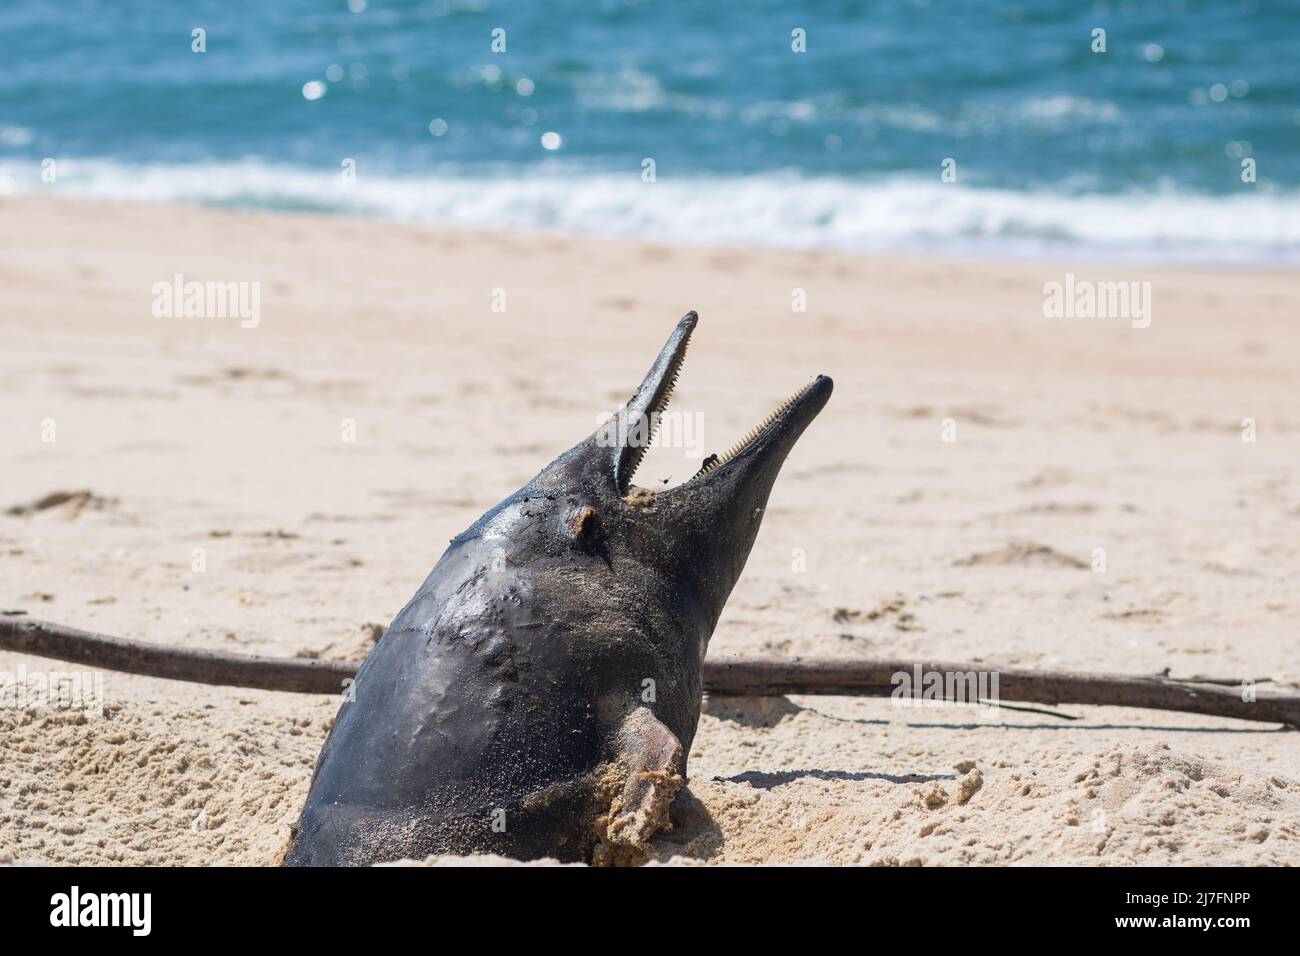 A buried dead porpoise washed ashore at the beach in advanced stage of decomposition with the head sticking out of the sand and open mouth Stock Photo